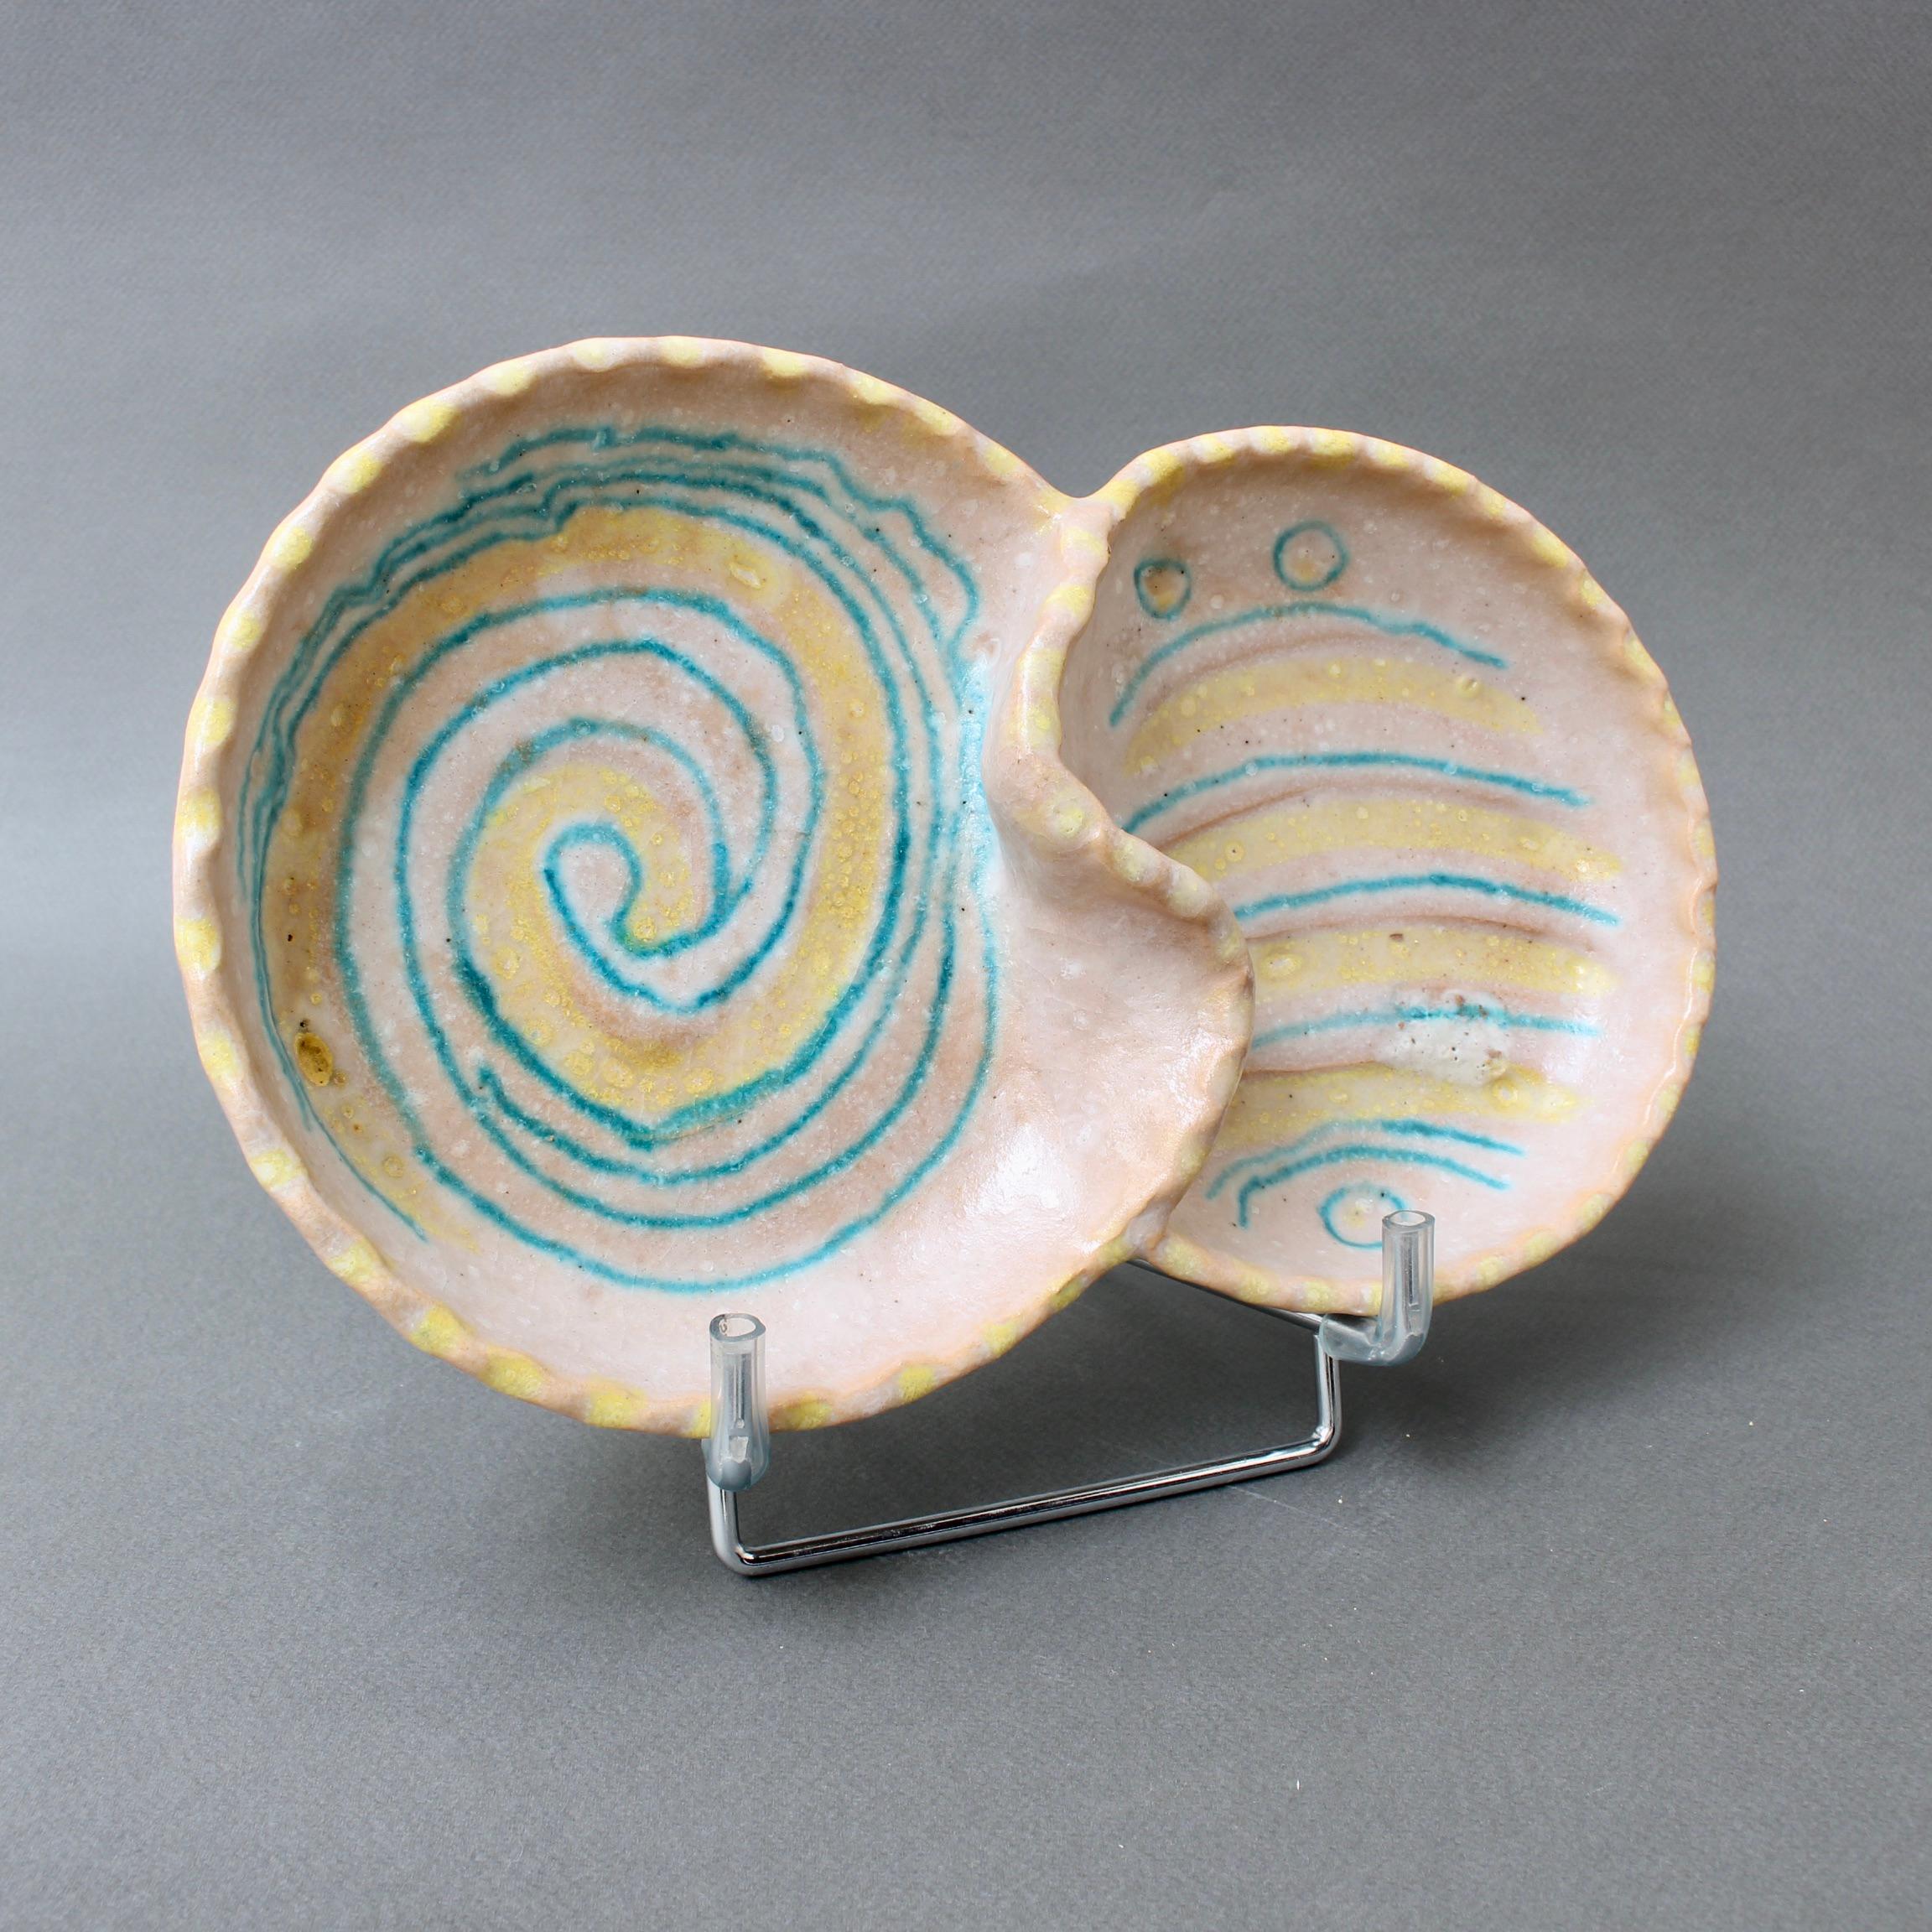 Vintage Italian decorative ceramic vide-poche or ashtray by Guido Gambone (circa 1950s). Decorated on the inside with yellow and turquoise spiralling as well as straight lines and circles, it is a delight to behold. Two ceramic circles of different